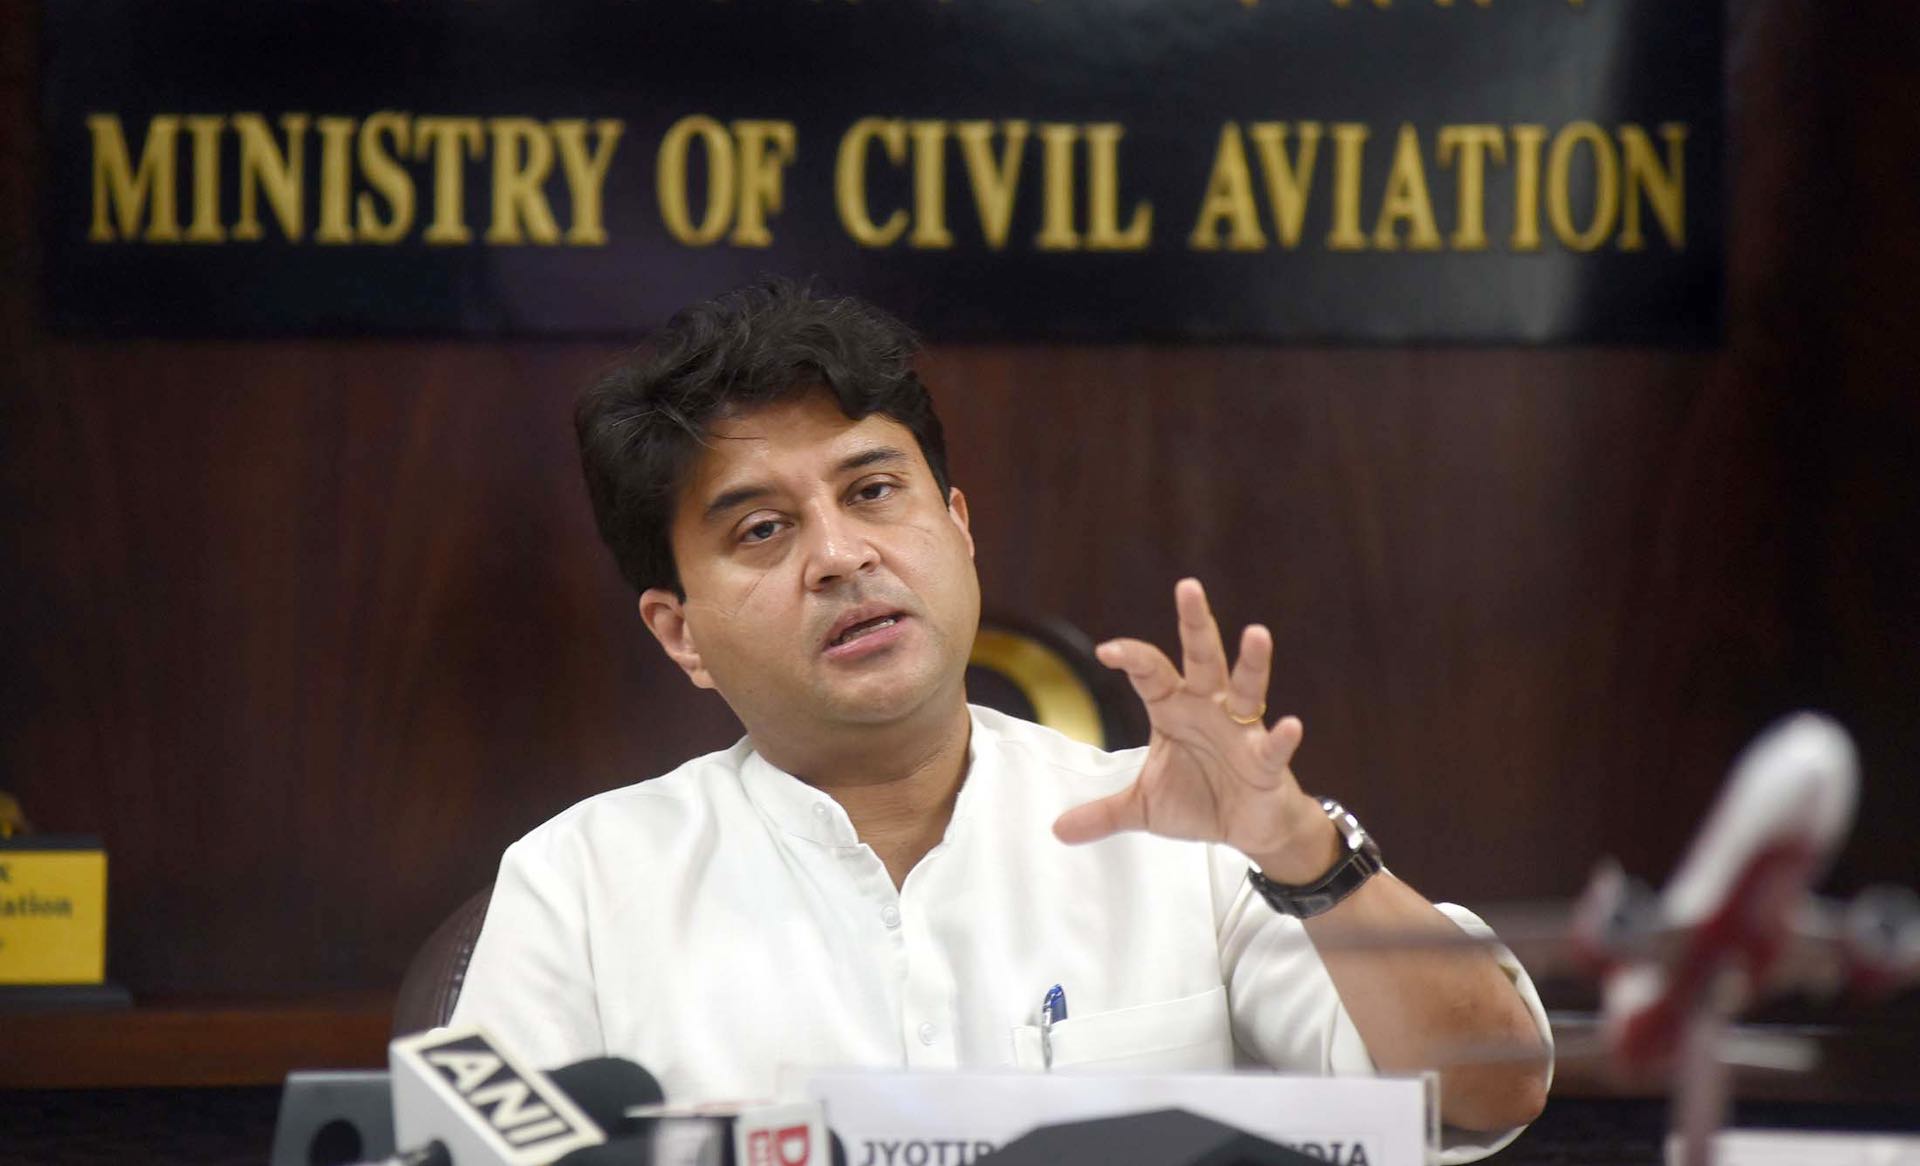 For the first time in Indian history, civil aviation is being democratized